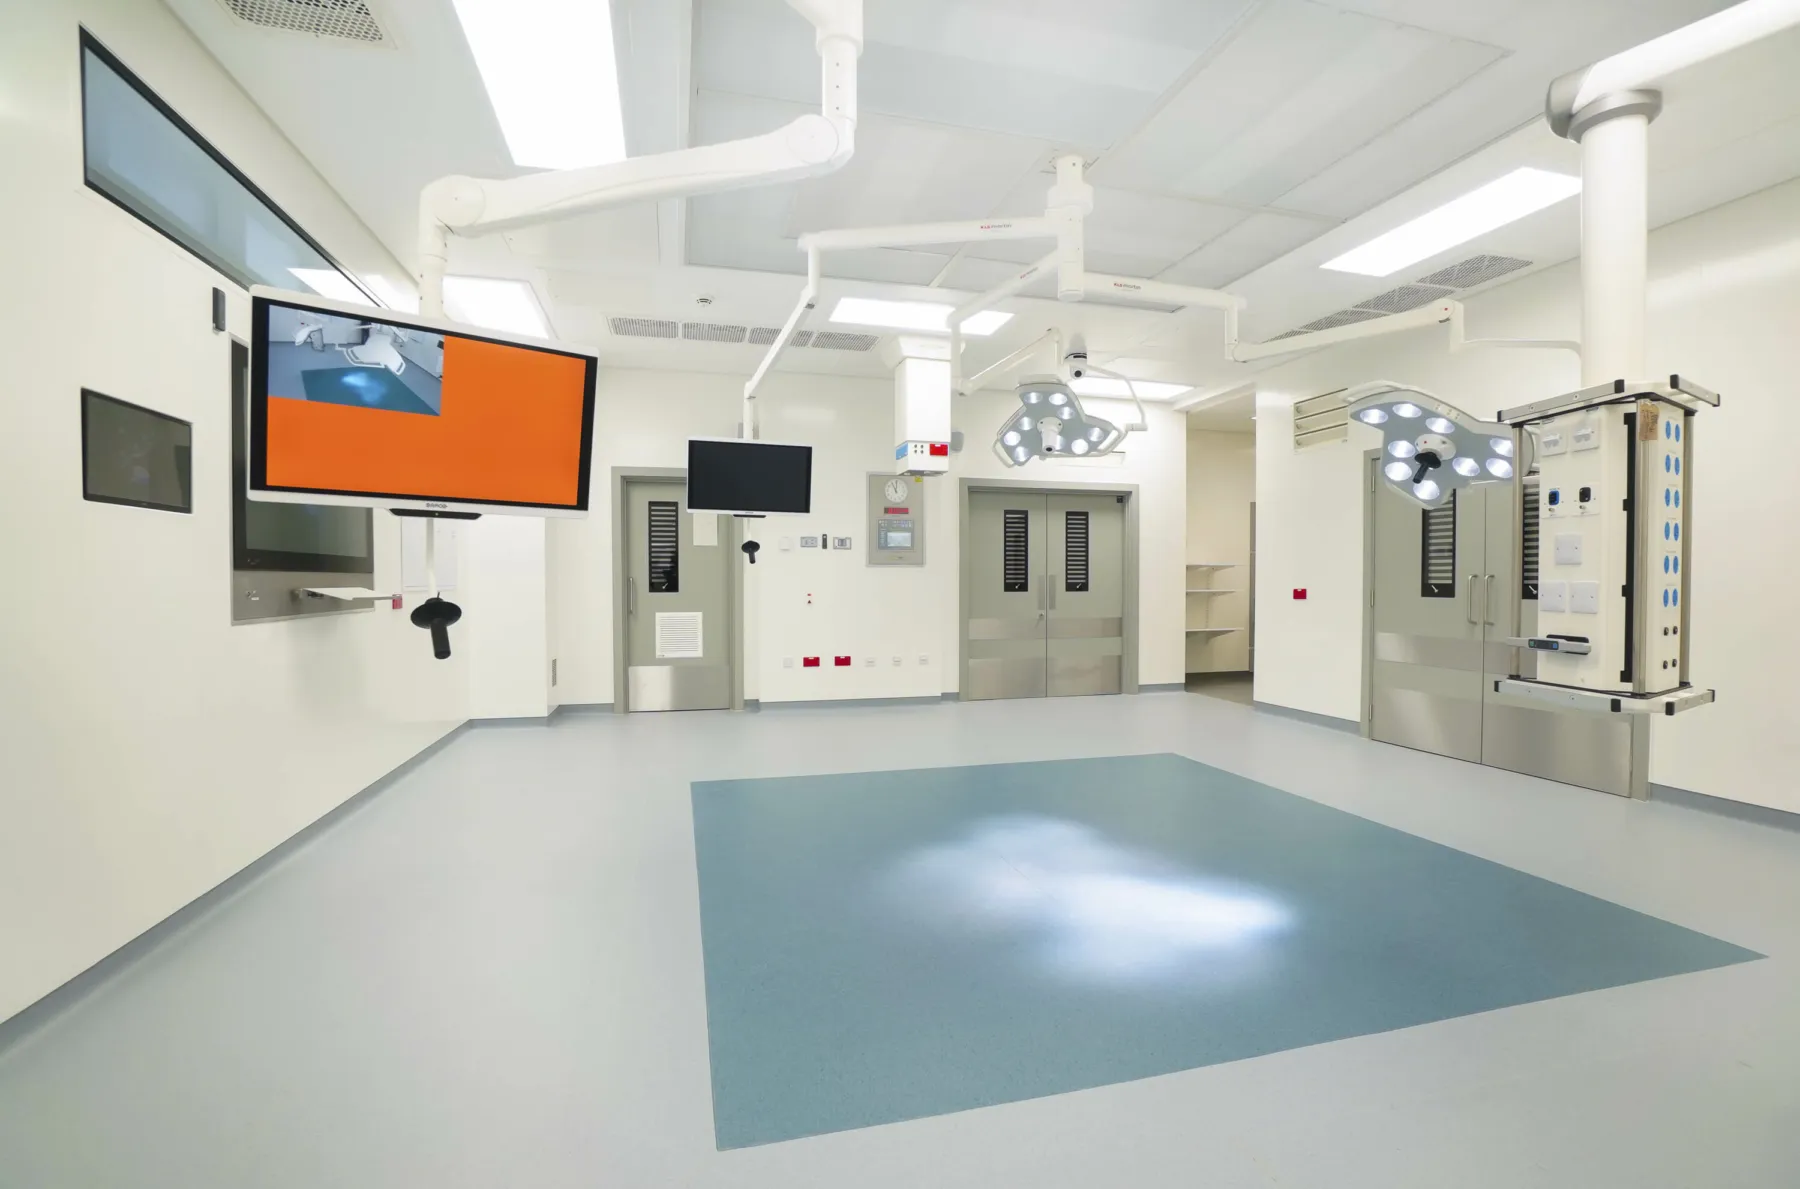 Orthopaedic operating theatre newly constructed at the National Treatment Centre - Fife Orthopaedics, Kirkcaldy. Lighting and screes are suspended on arms from the ceiling.